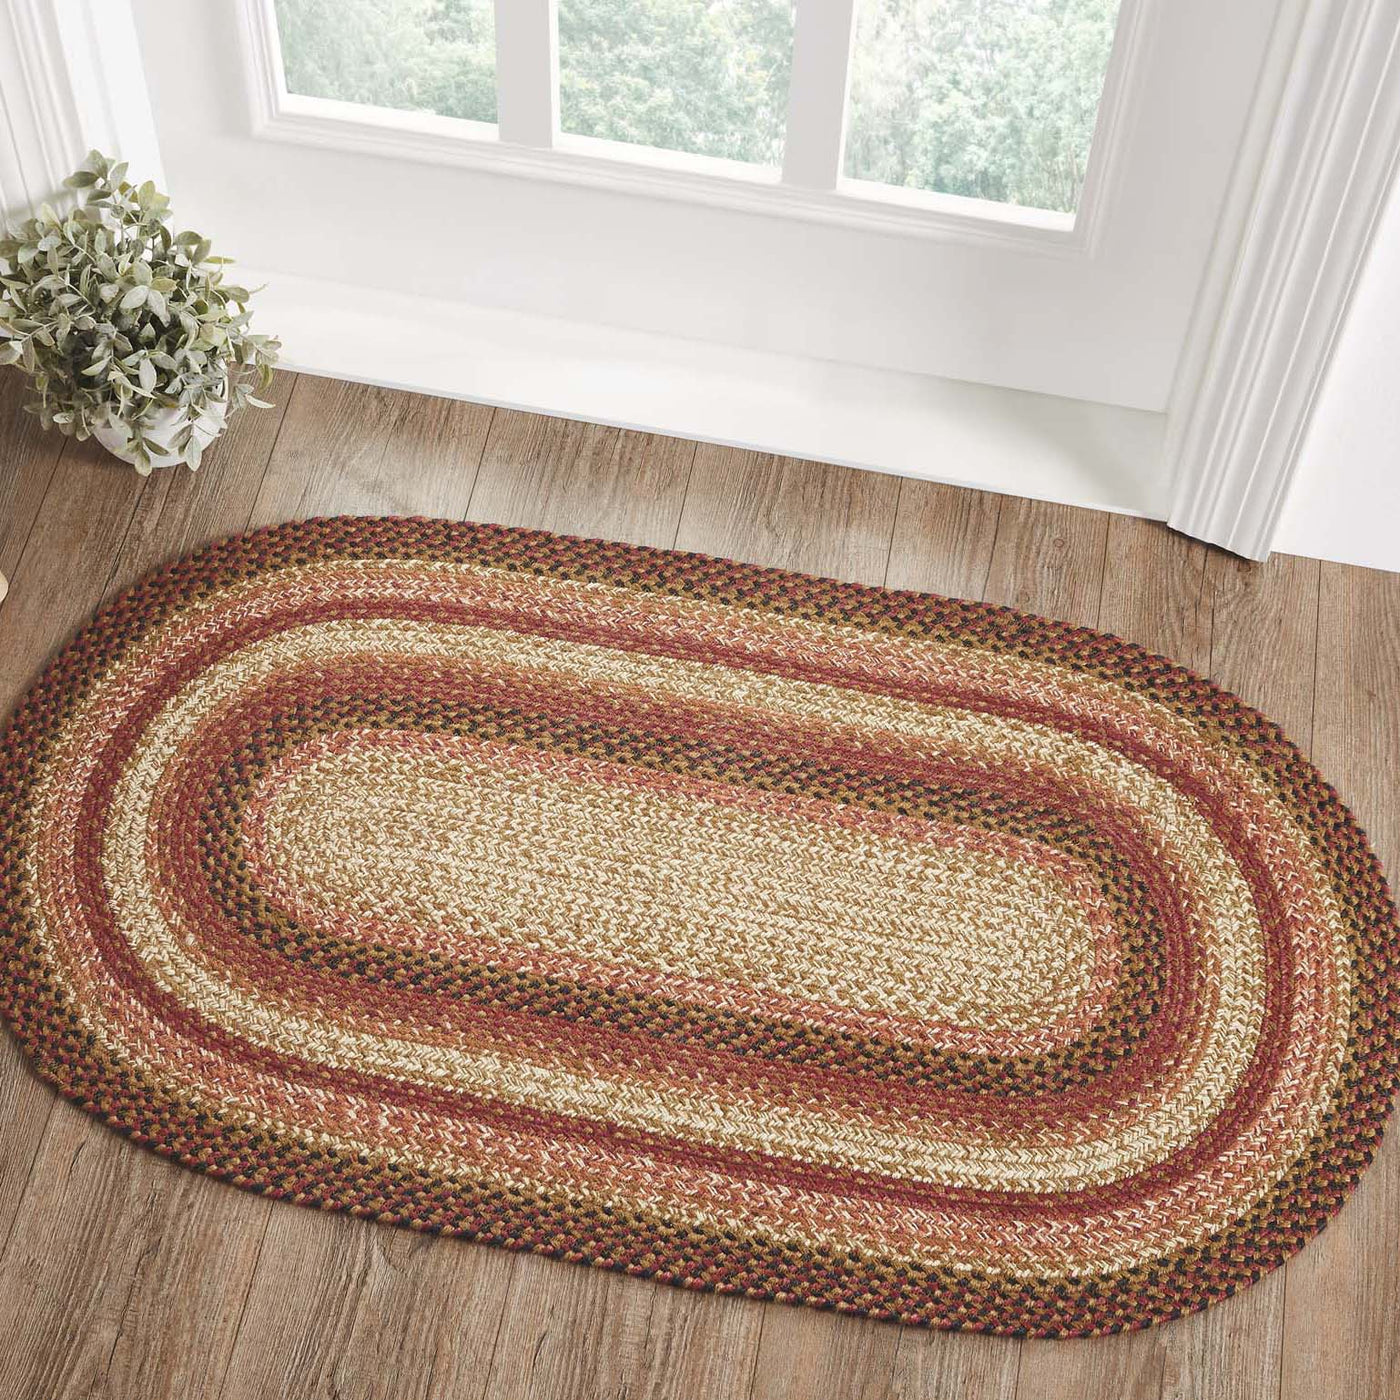 Ginger Spice Rugs